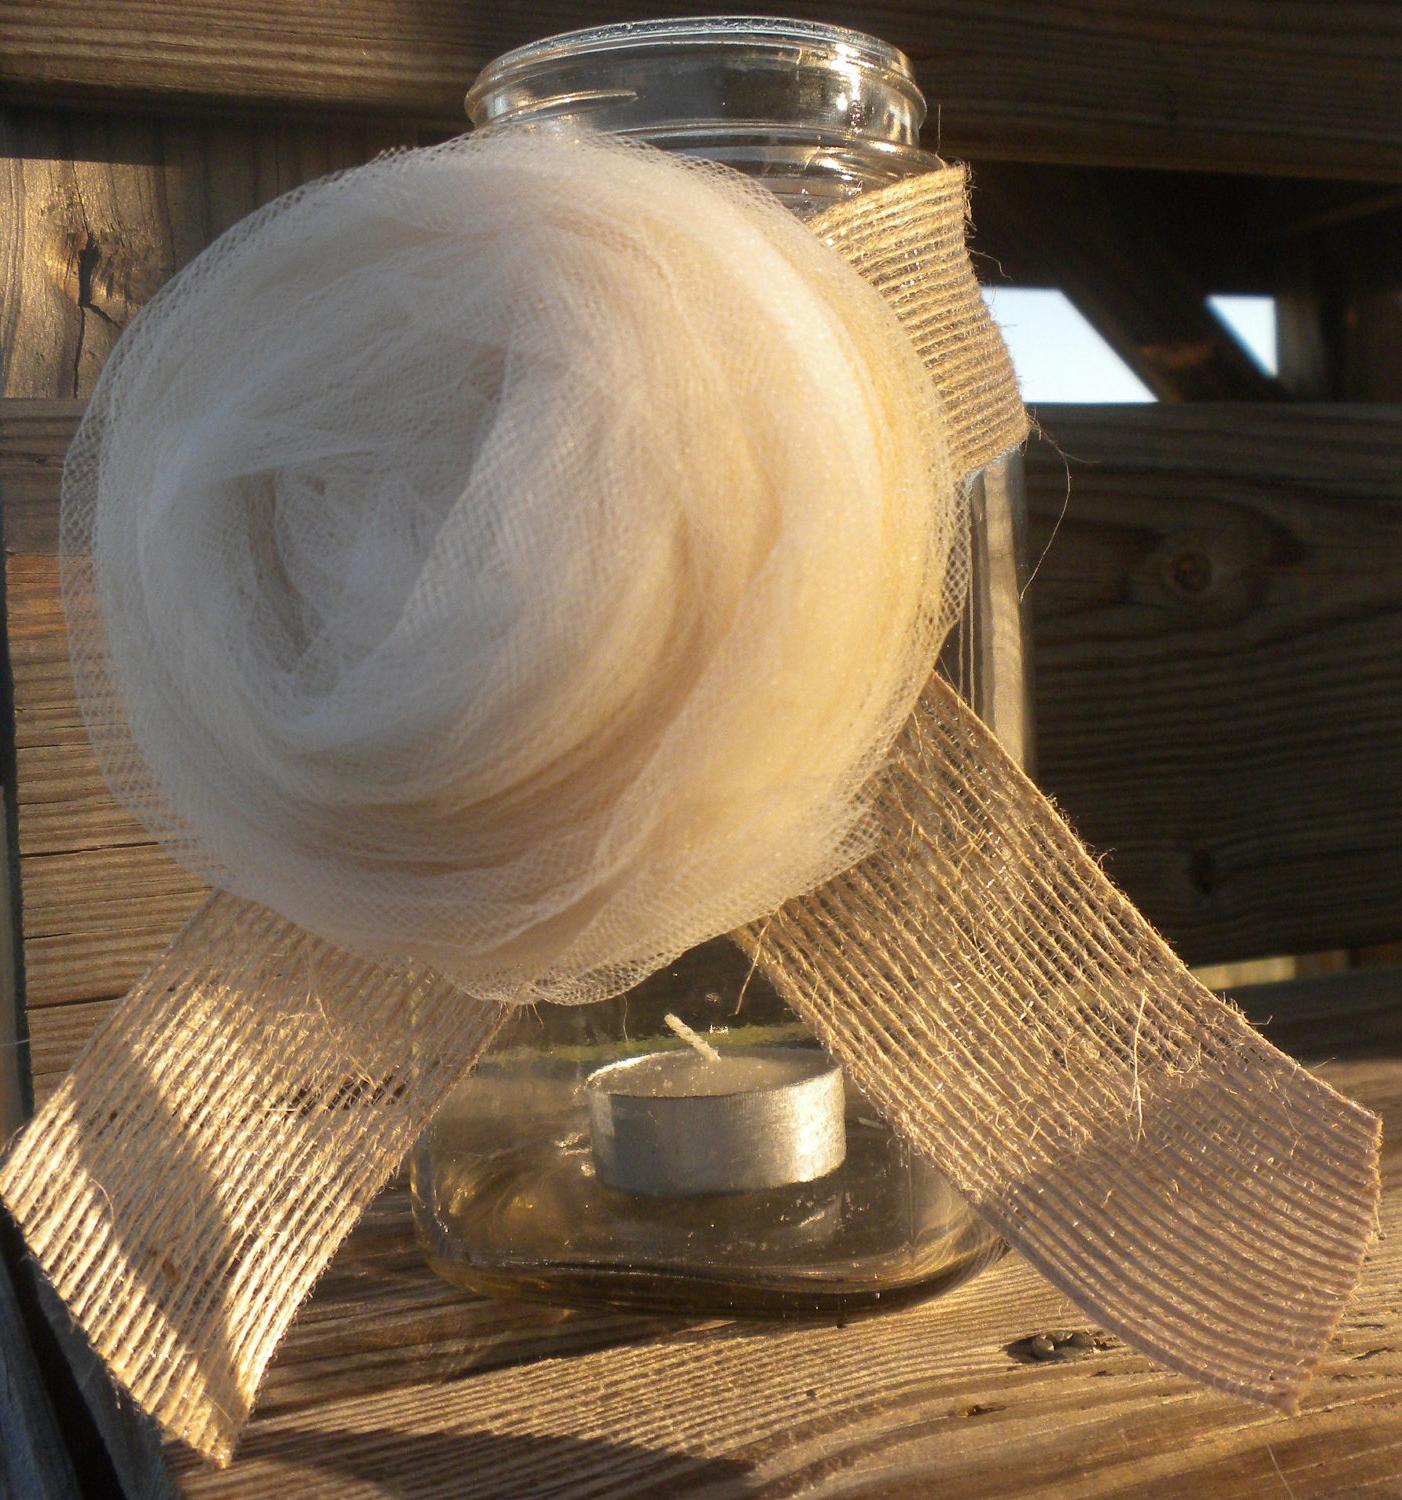 Rustic and Country Chic Vintage Inspired Tulle Rose with Burlap Accent